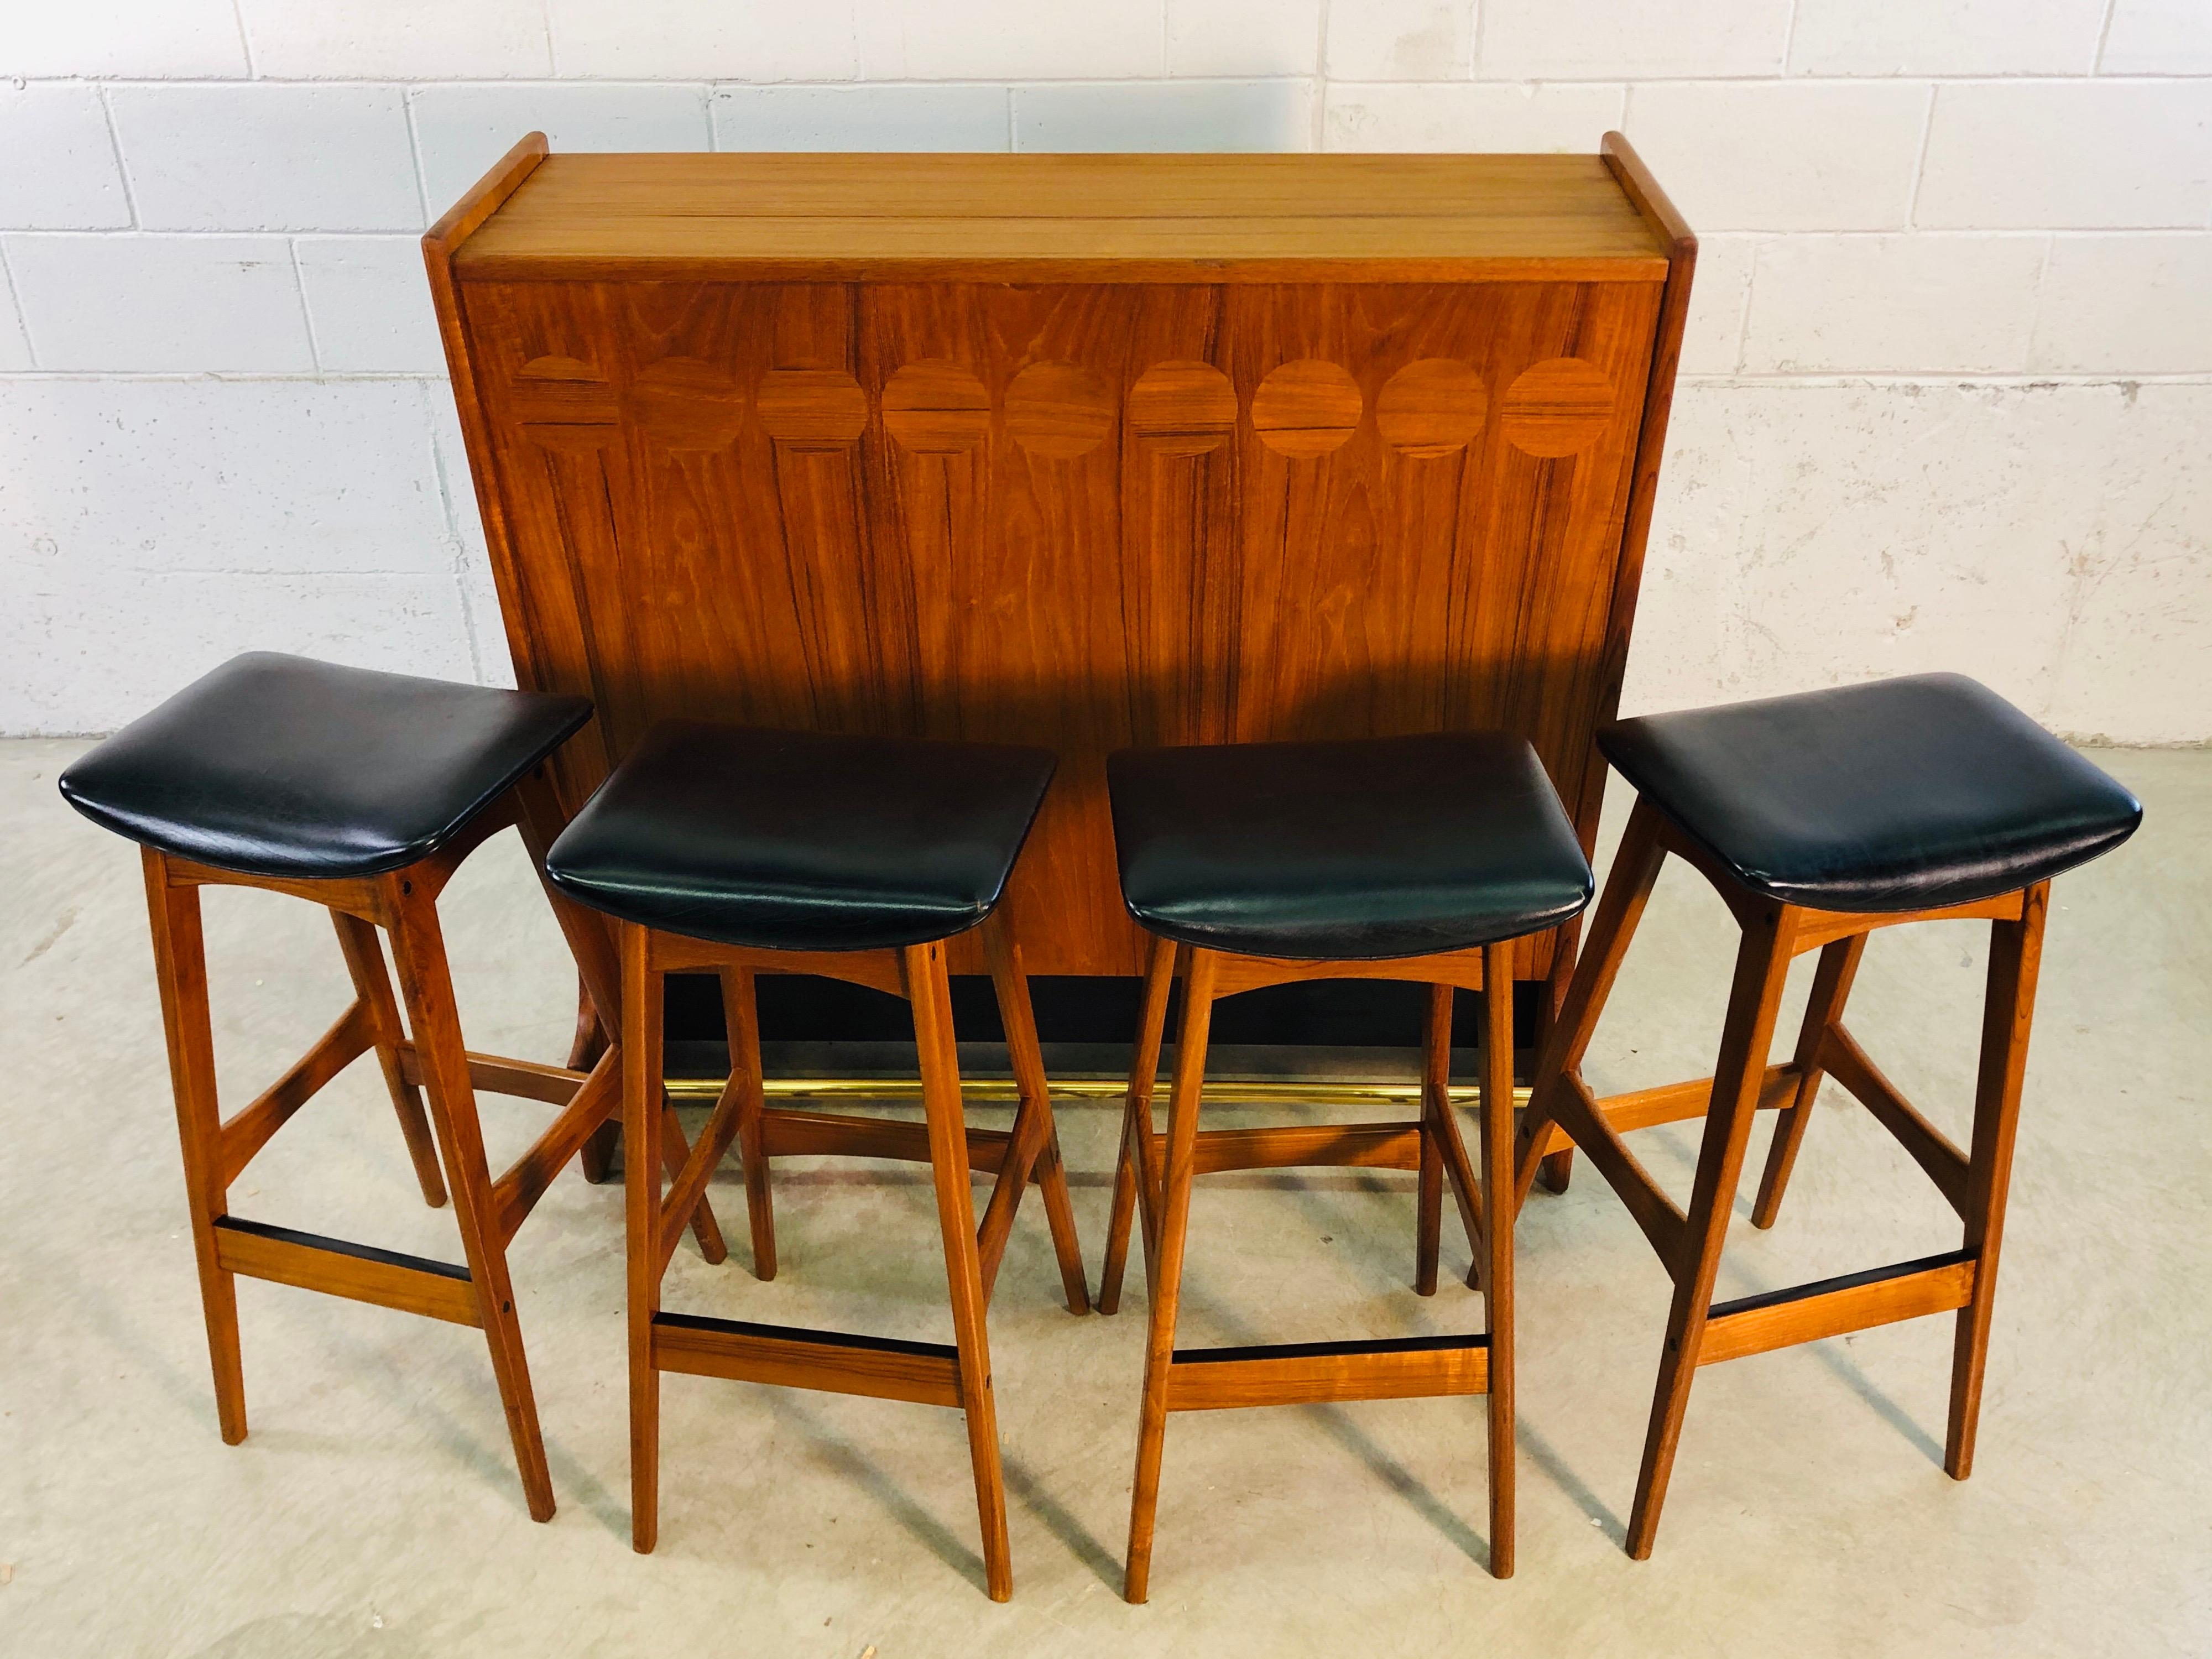 Vintage Danish teak dry bar and four stools designed by Johannes Anderson for BRDR Anderson Vejen. The teak dry bar holds a total of 18 bottles, comes with glass shelves and a mirror inside. The bar is accented with a brass footrest and black